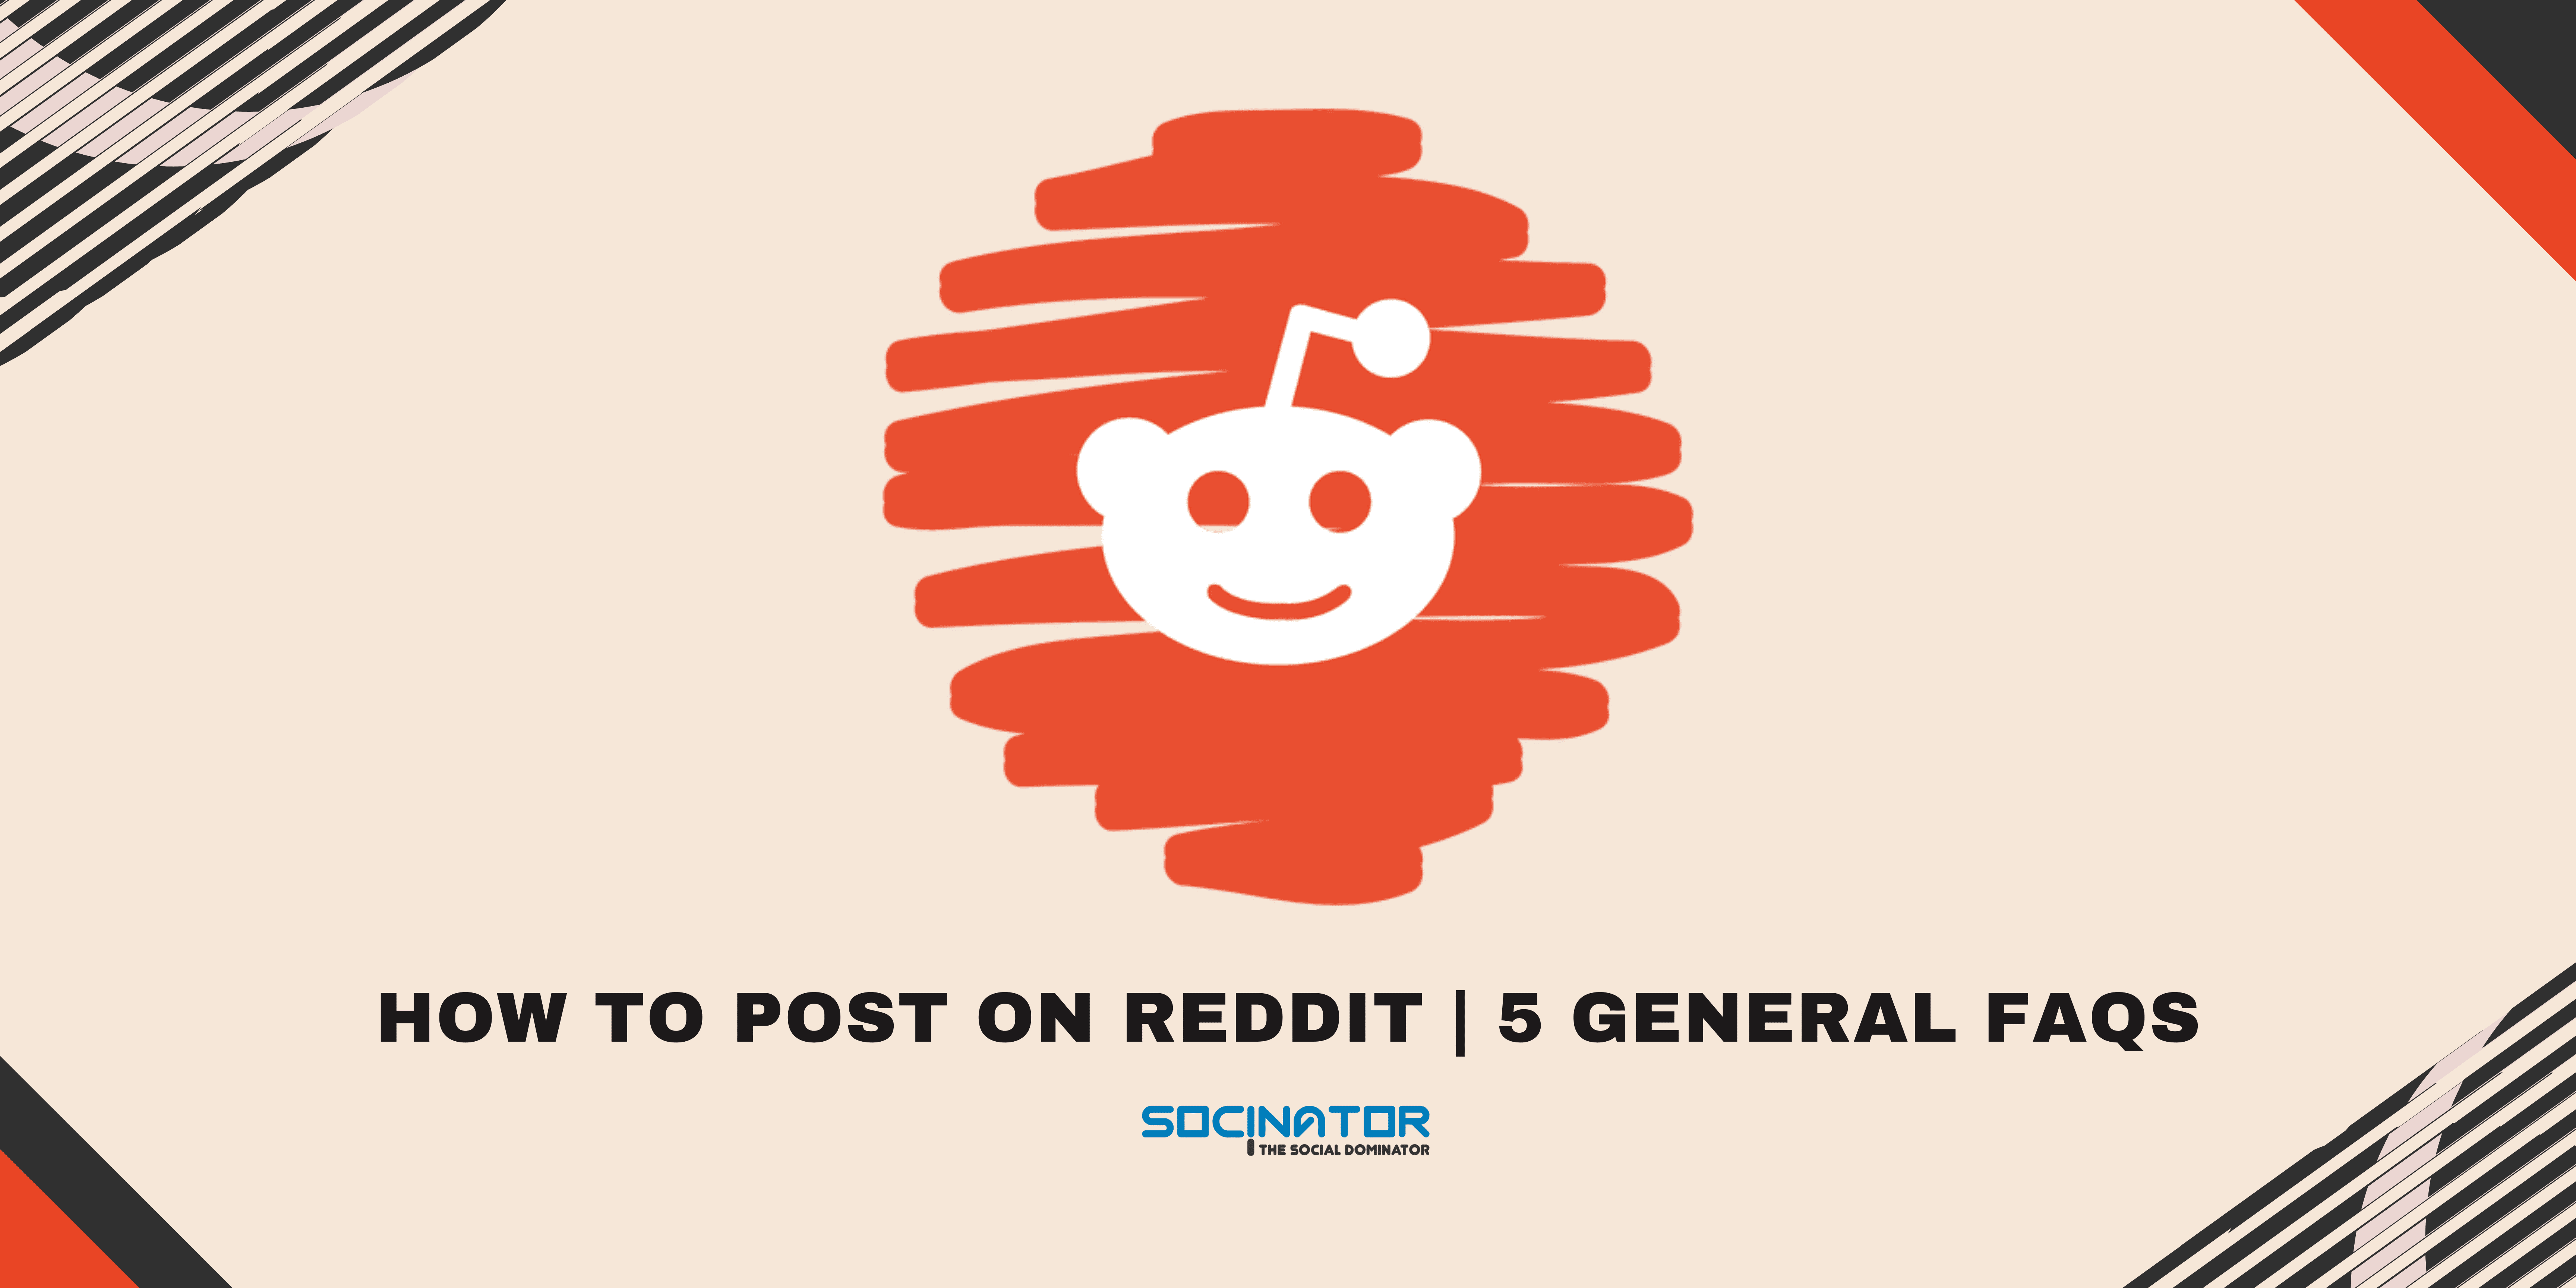 How To Post On Reddit | 5 General FAQs